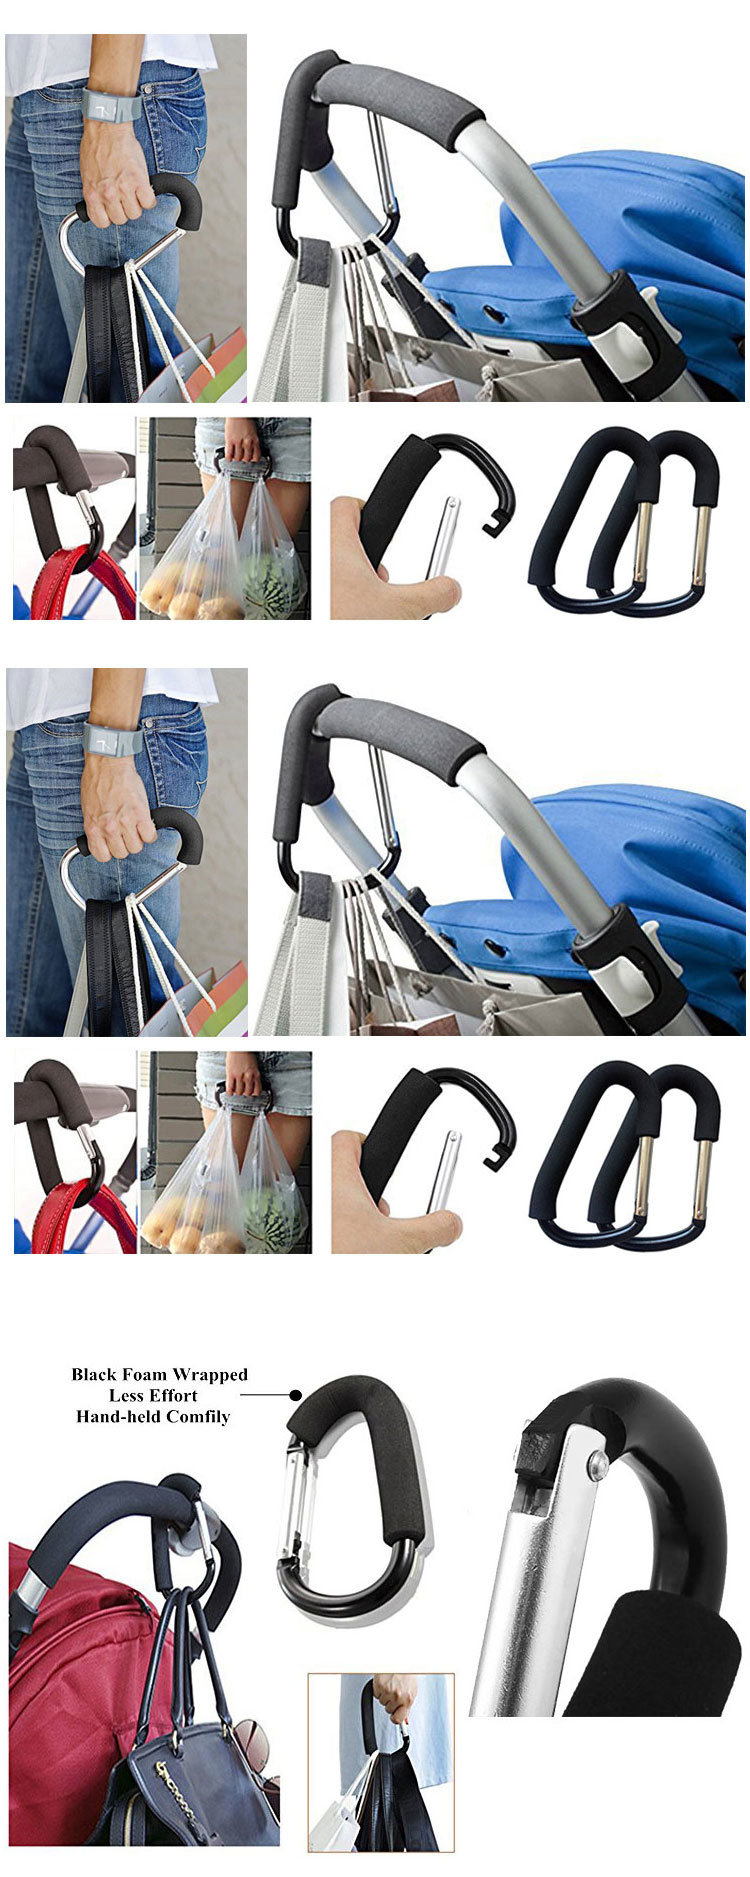 Mommy Hook, Stroller Hook Hanger for Baby Diaper Bags and Shopping Carts